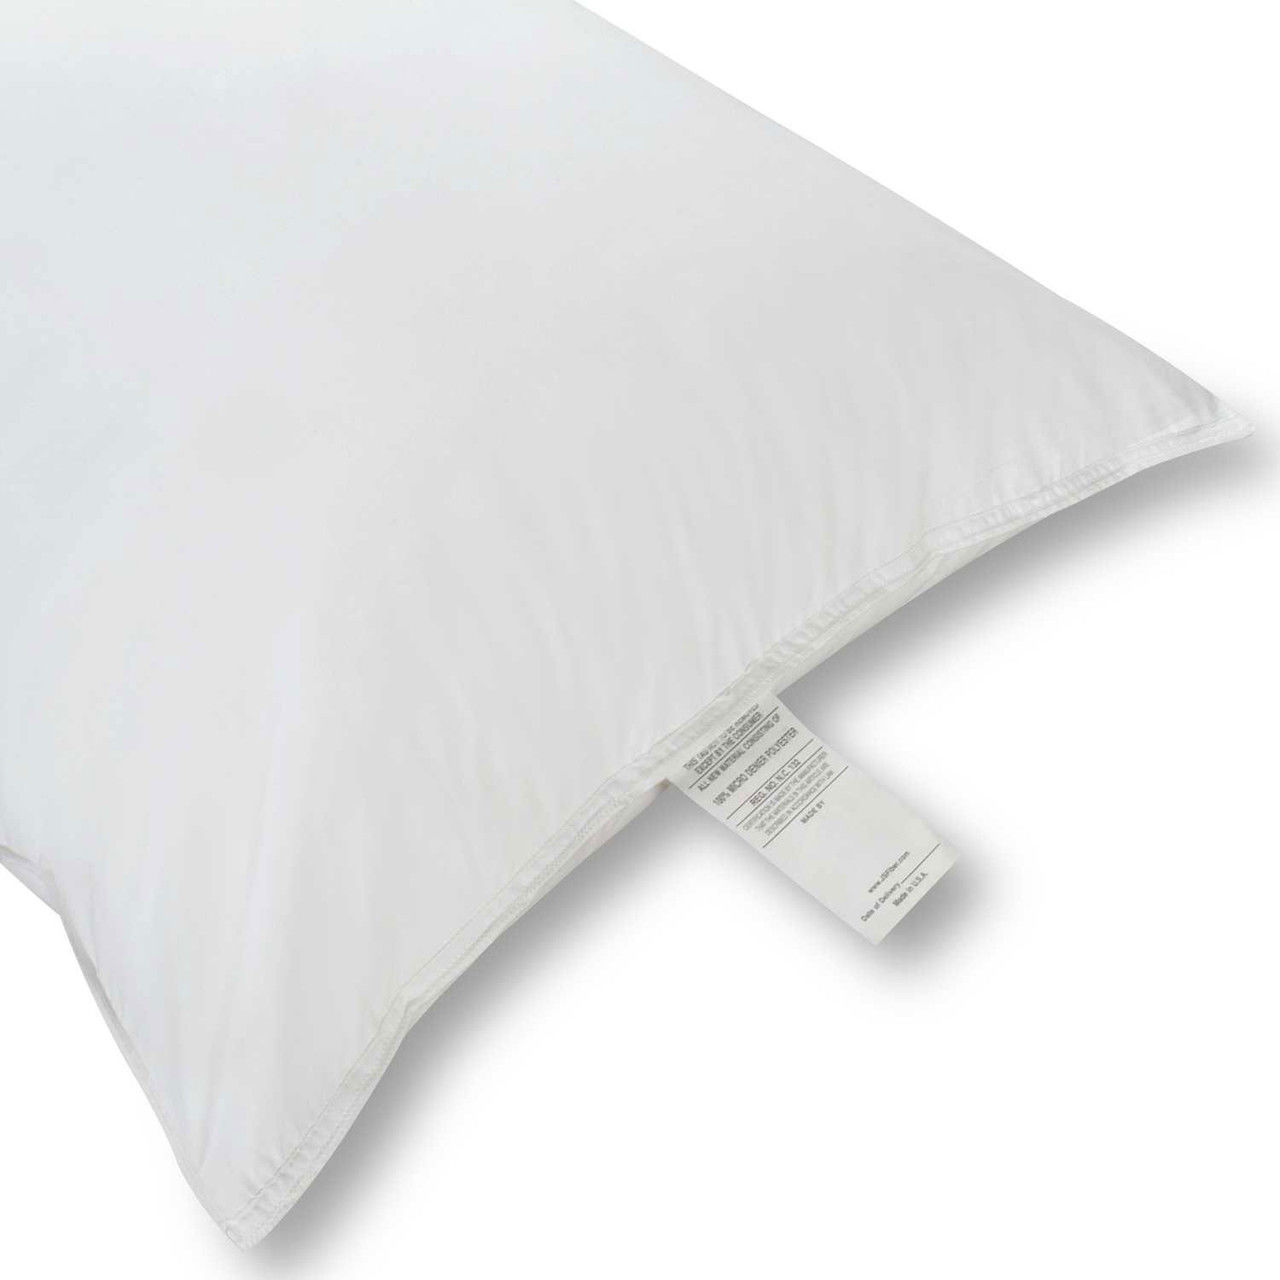 Is it possible to machine wash the Ultra Down Pillow made of synthetic materials?